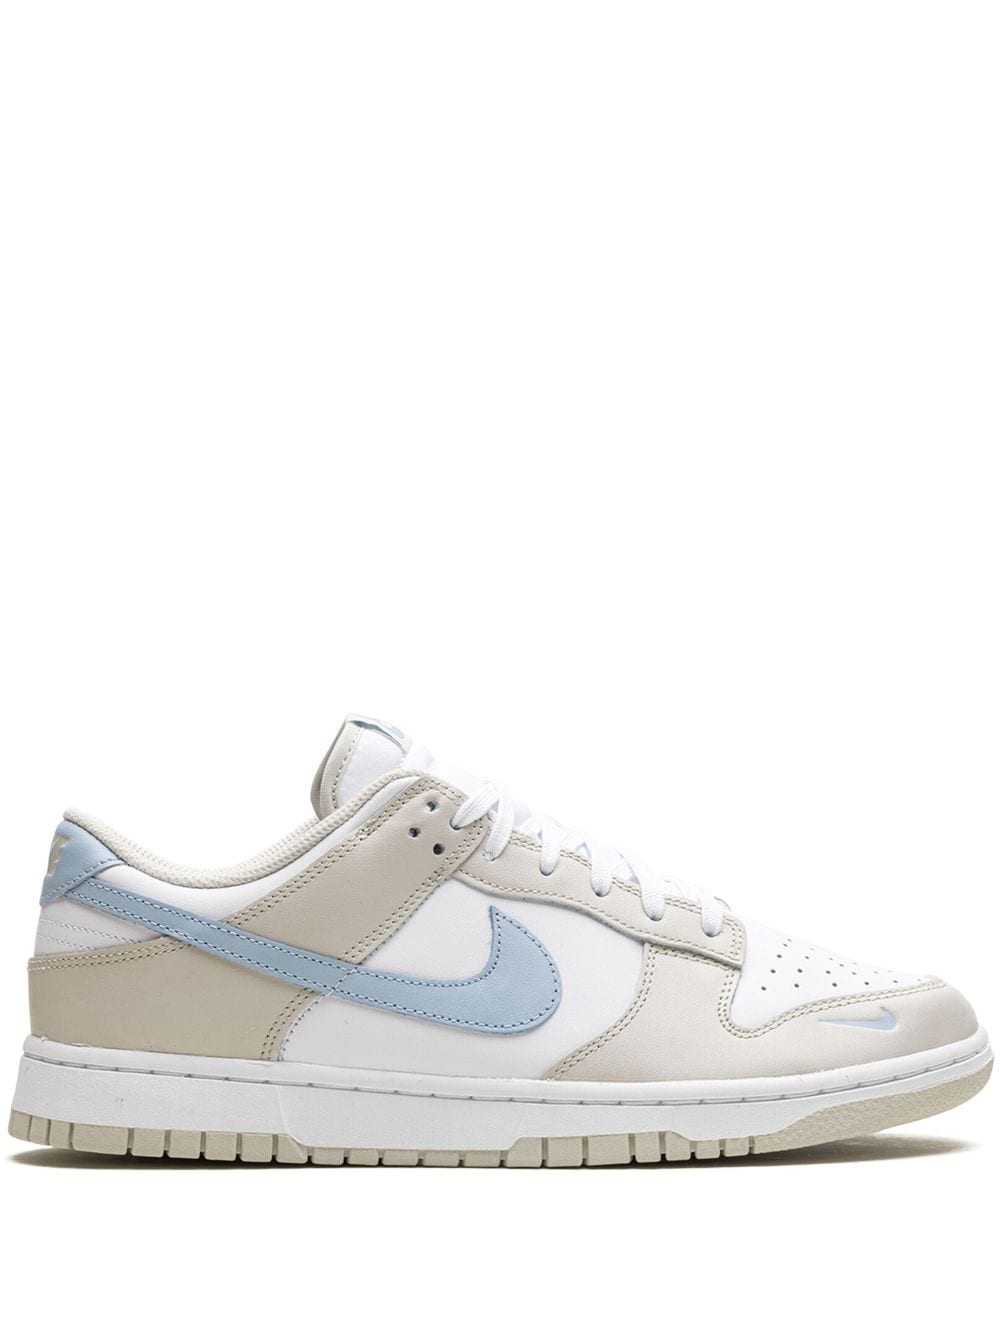 Image 1 of Nike Dunk Low "Light Bone/Armory Blue" sneakers